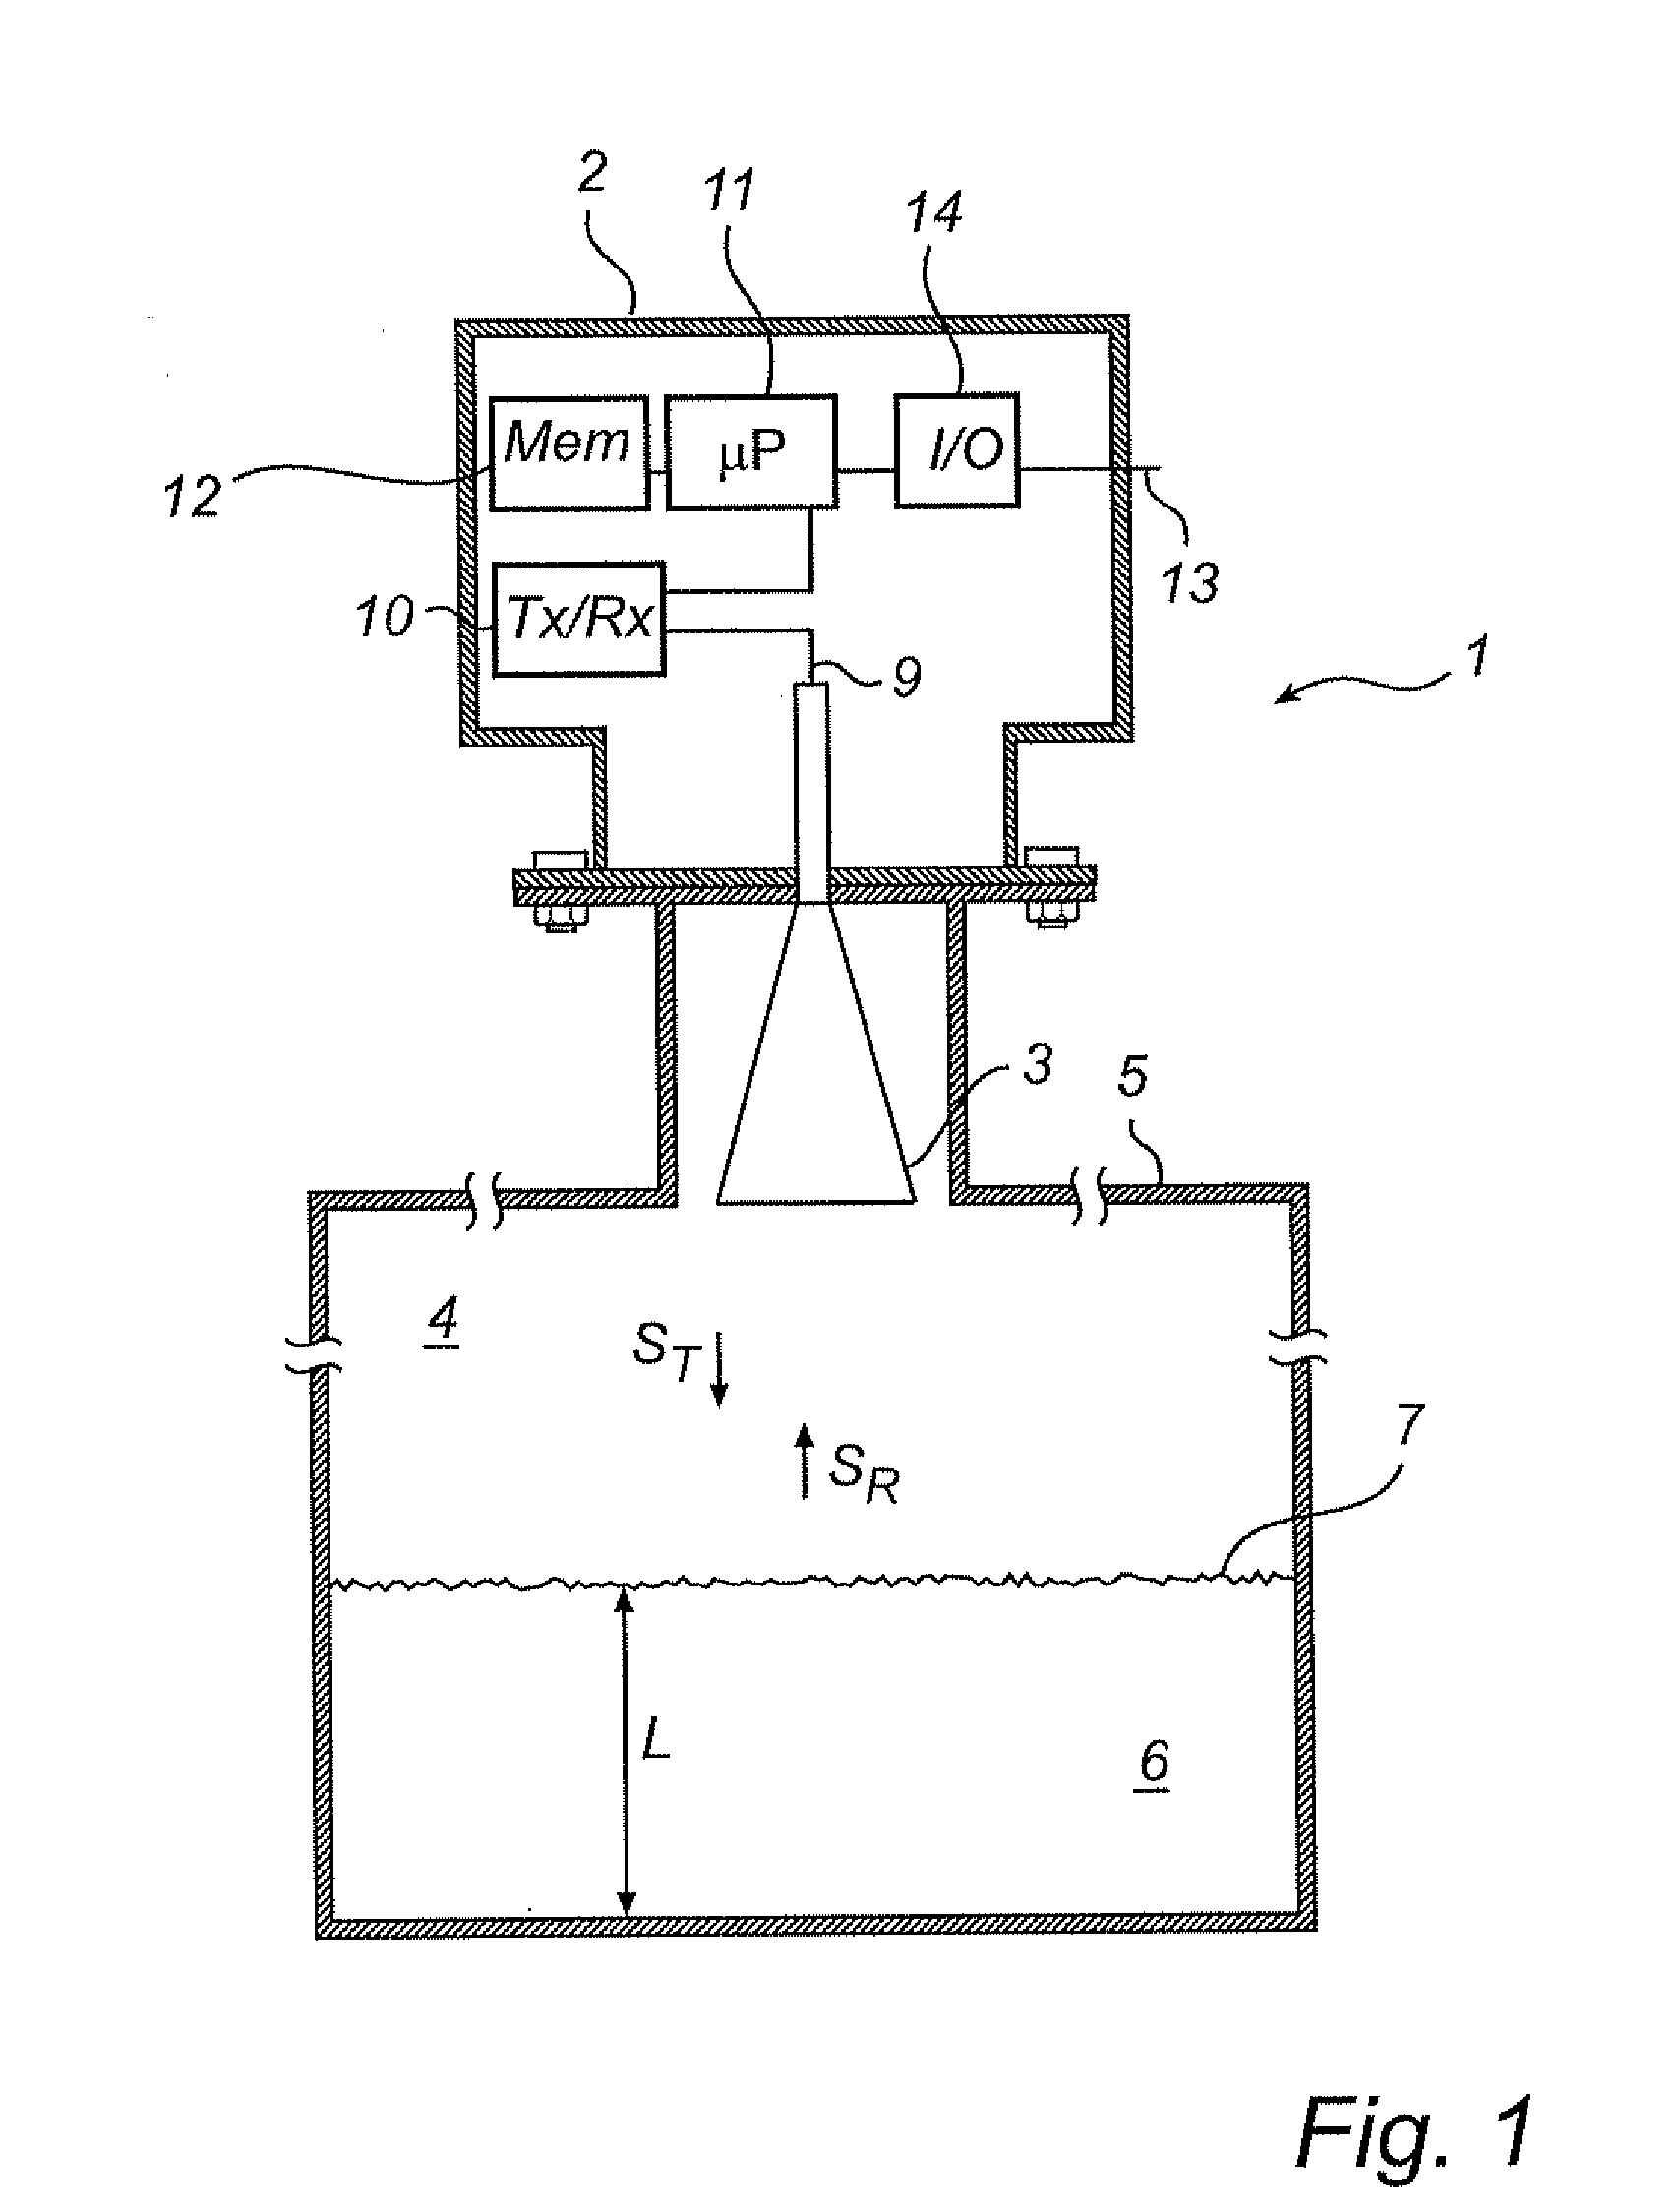 Radar level gauging using frequency modulated pulsed wave